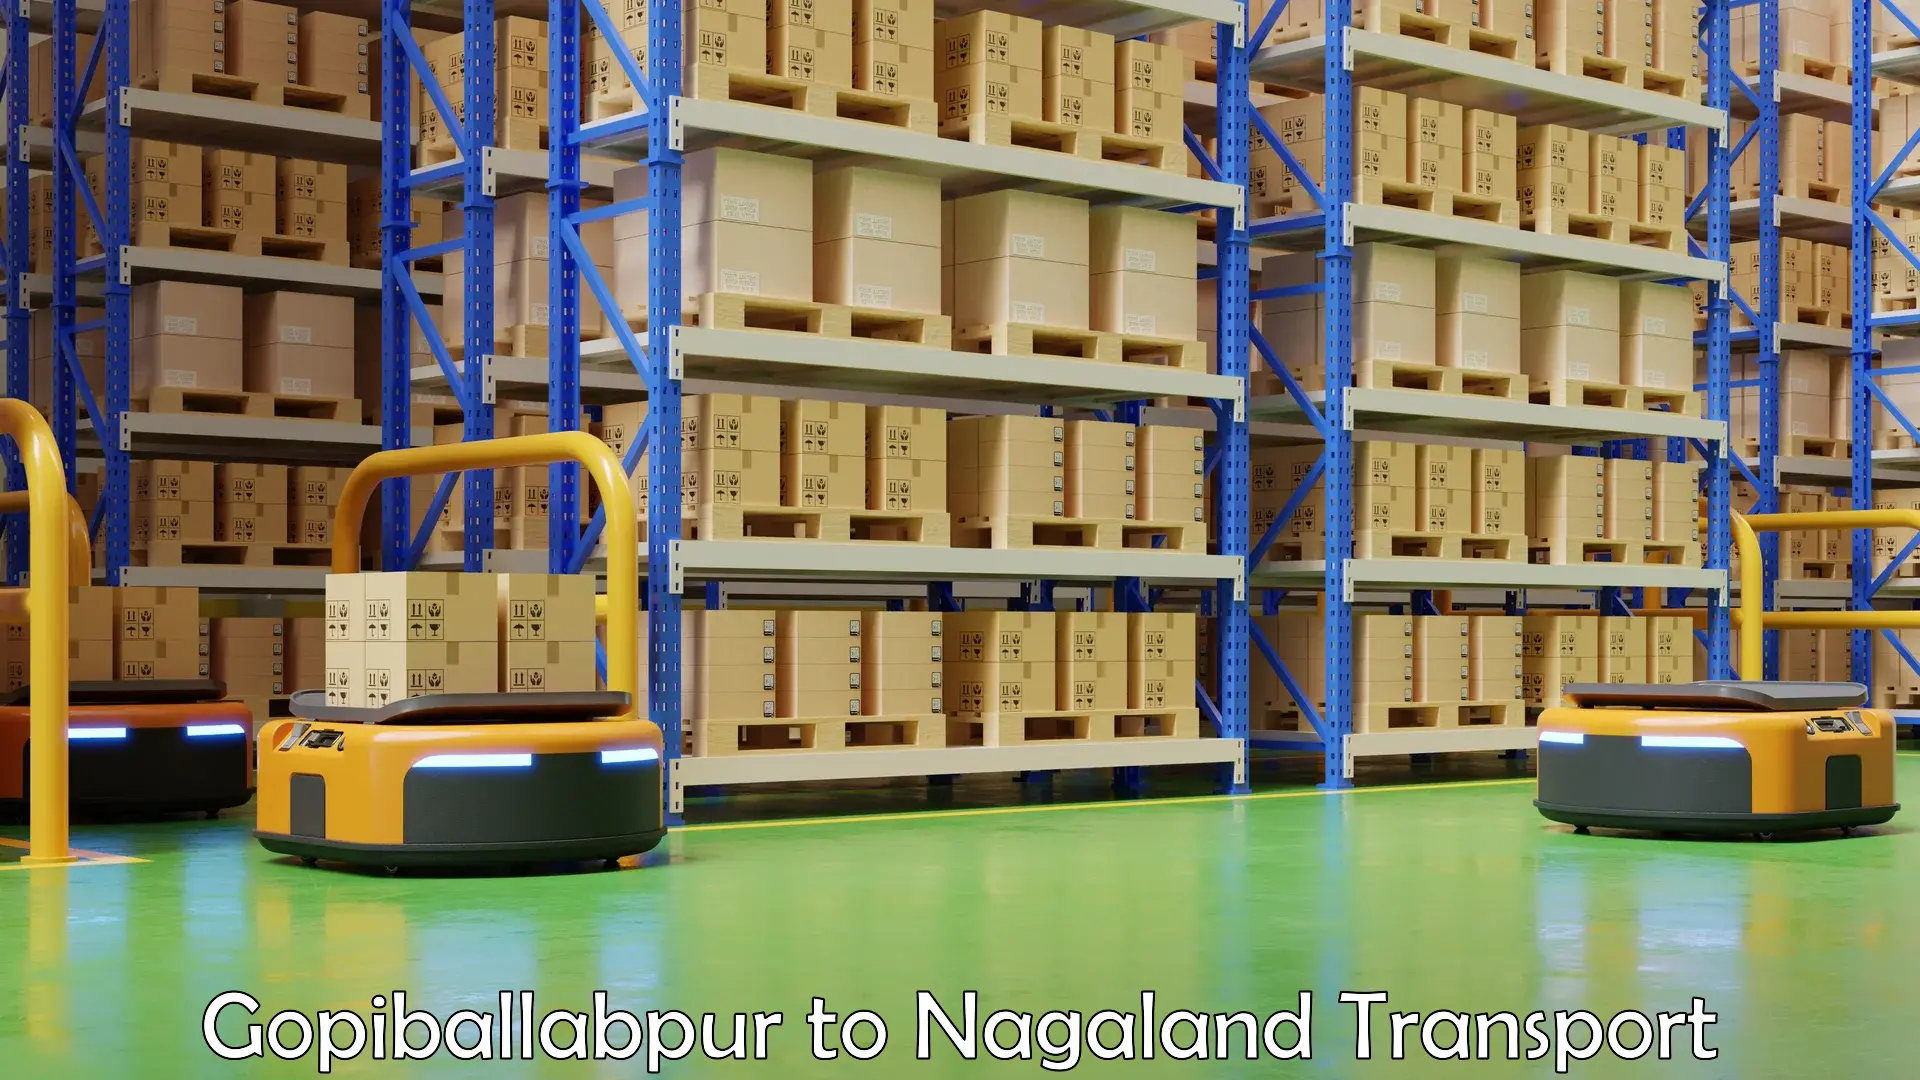 Goods delivery service Gopiballabpur to NIT Nagaland